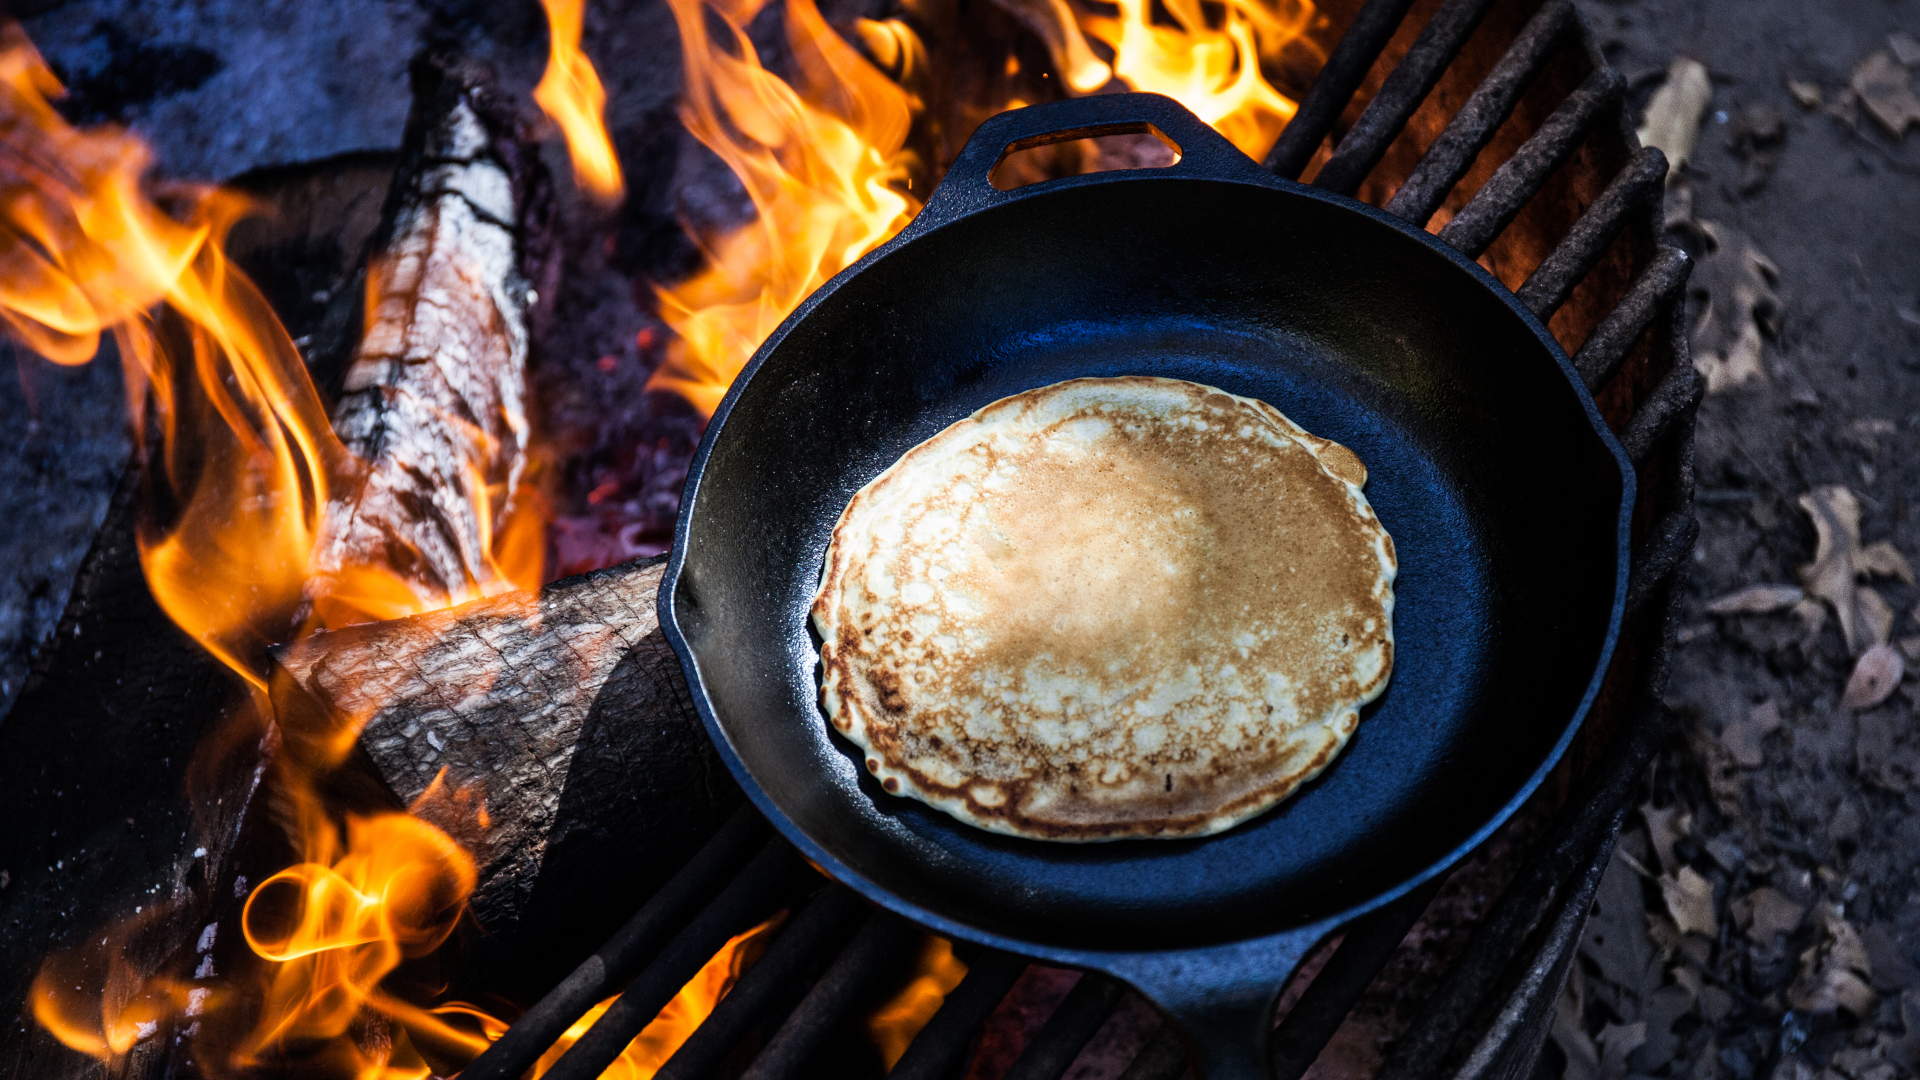 Camping with Cast Iron Pans – Stovetop, Charcoal, or Campfire